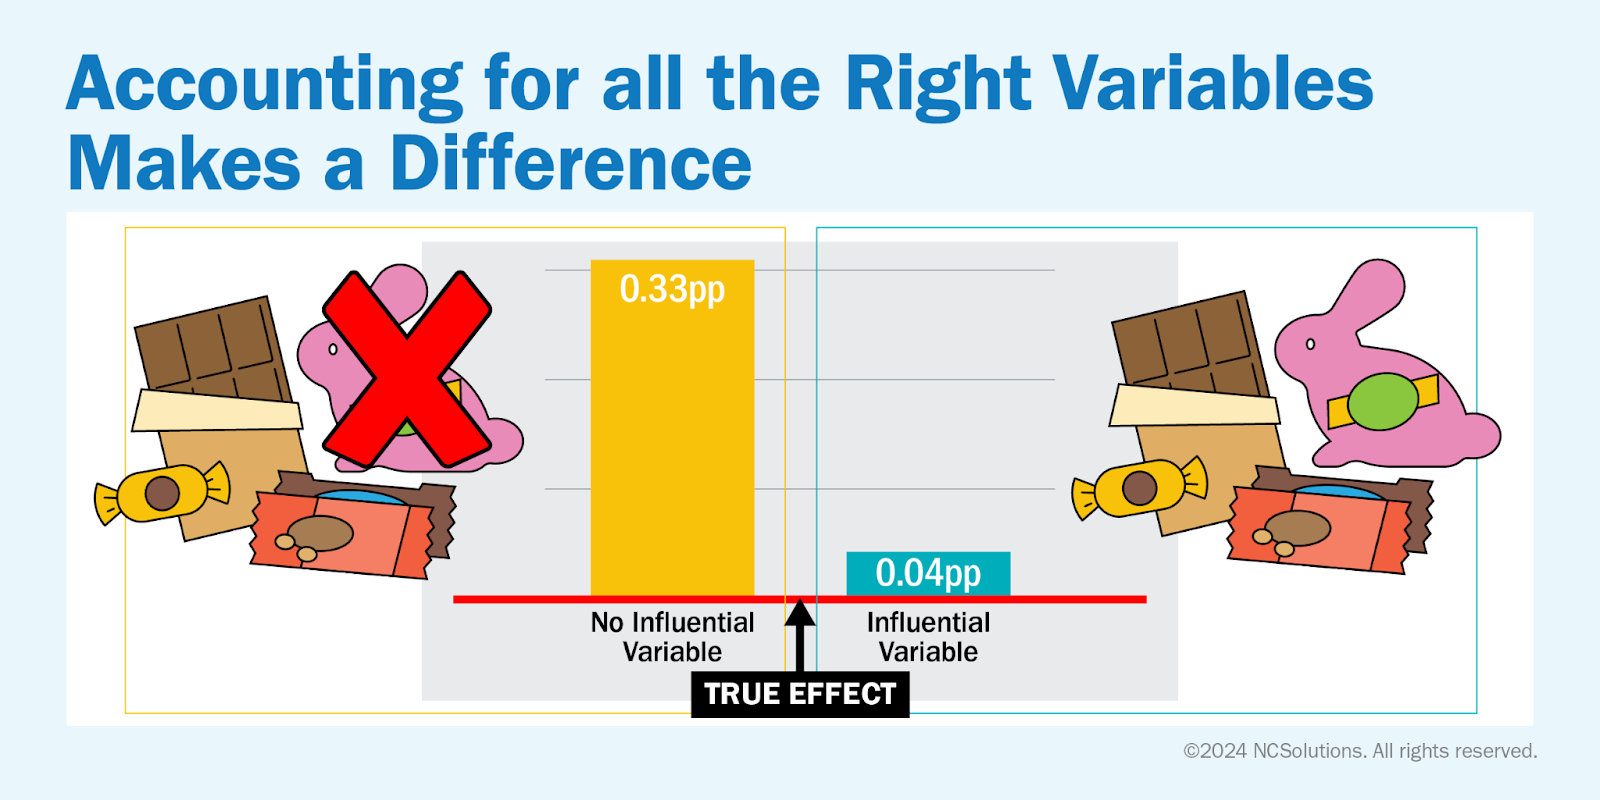 Accounting for all the right variables makes a difference